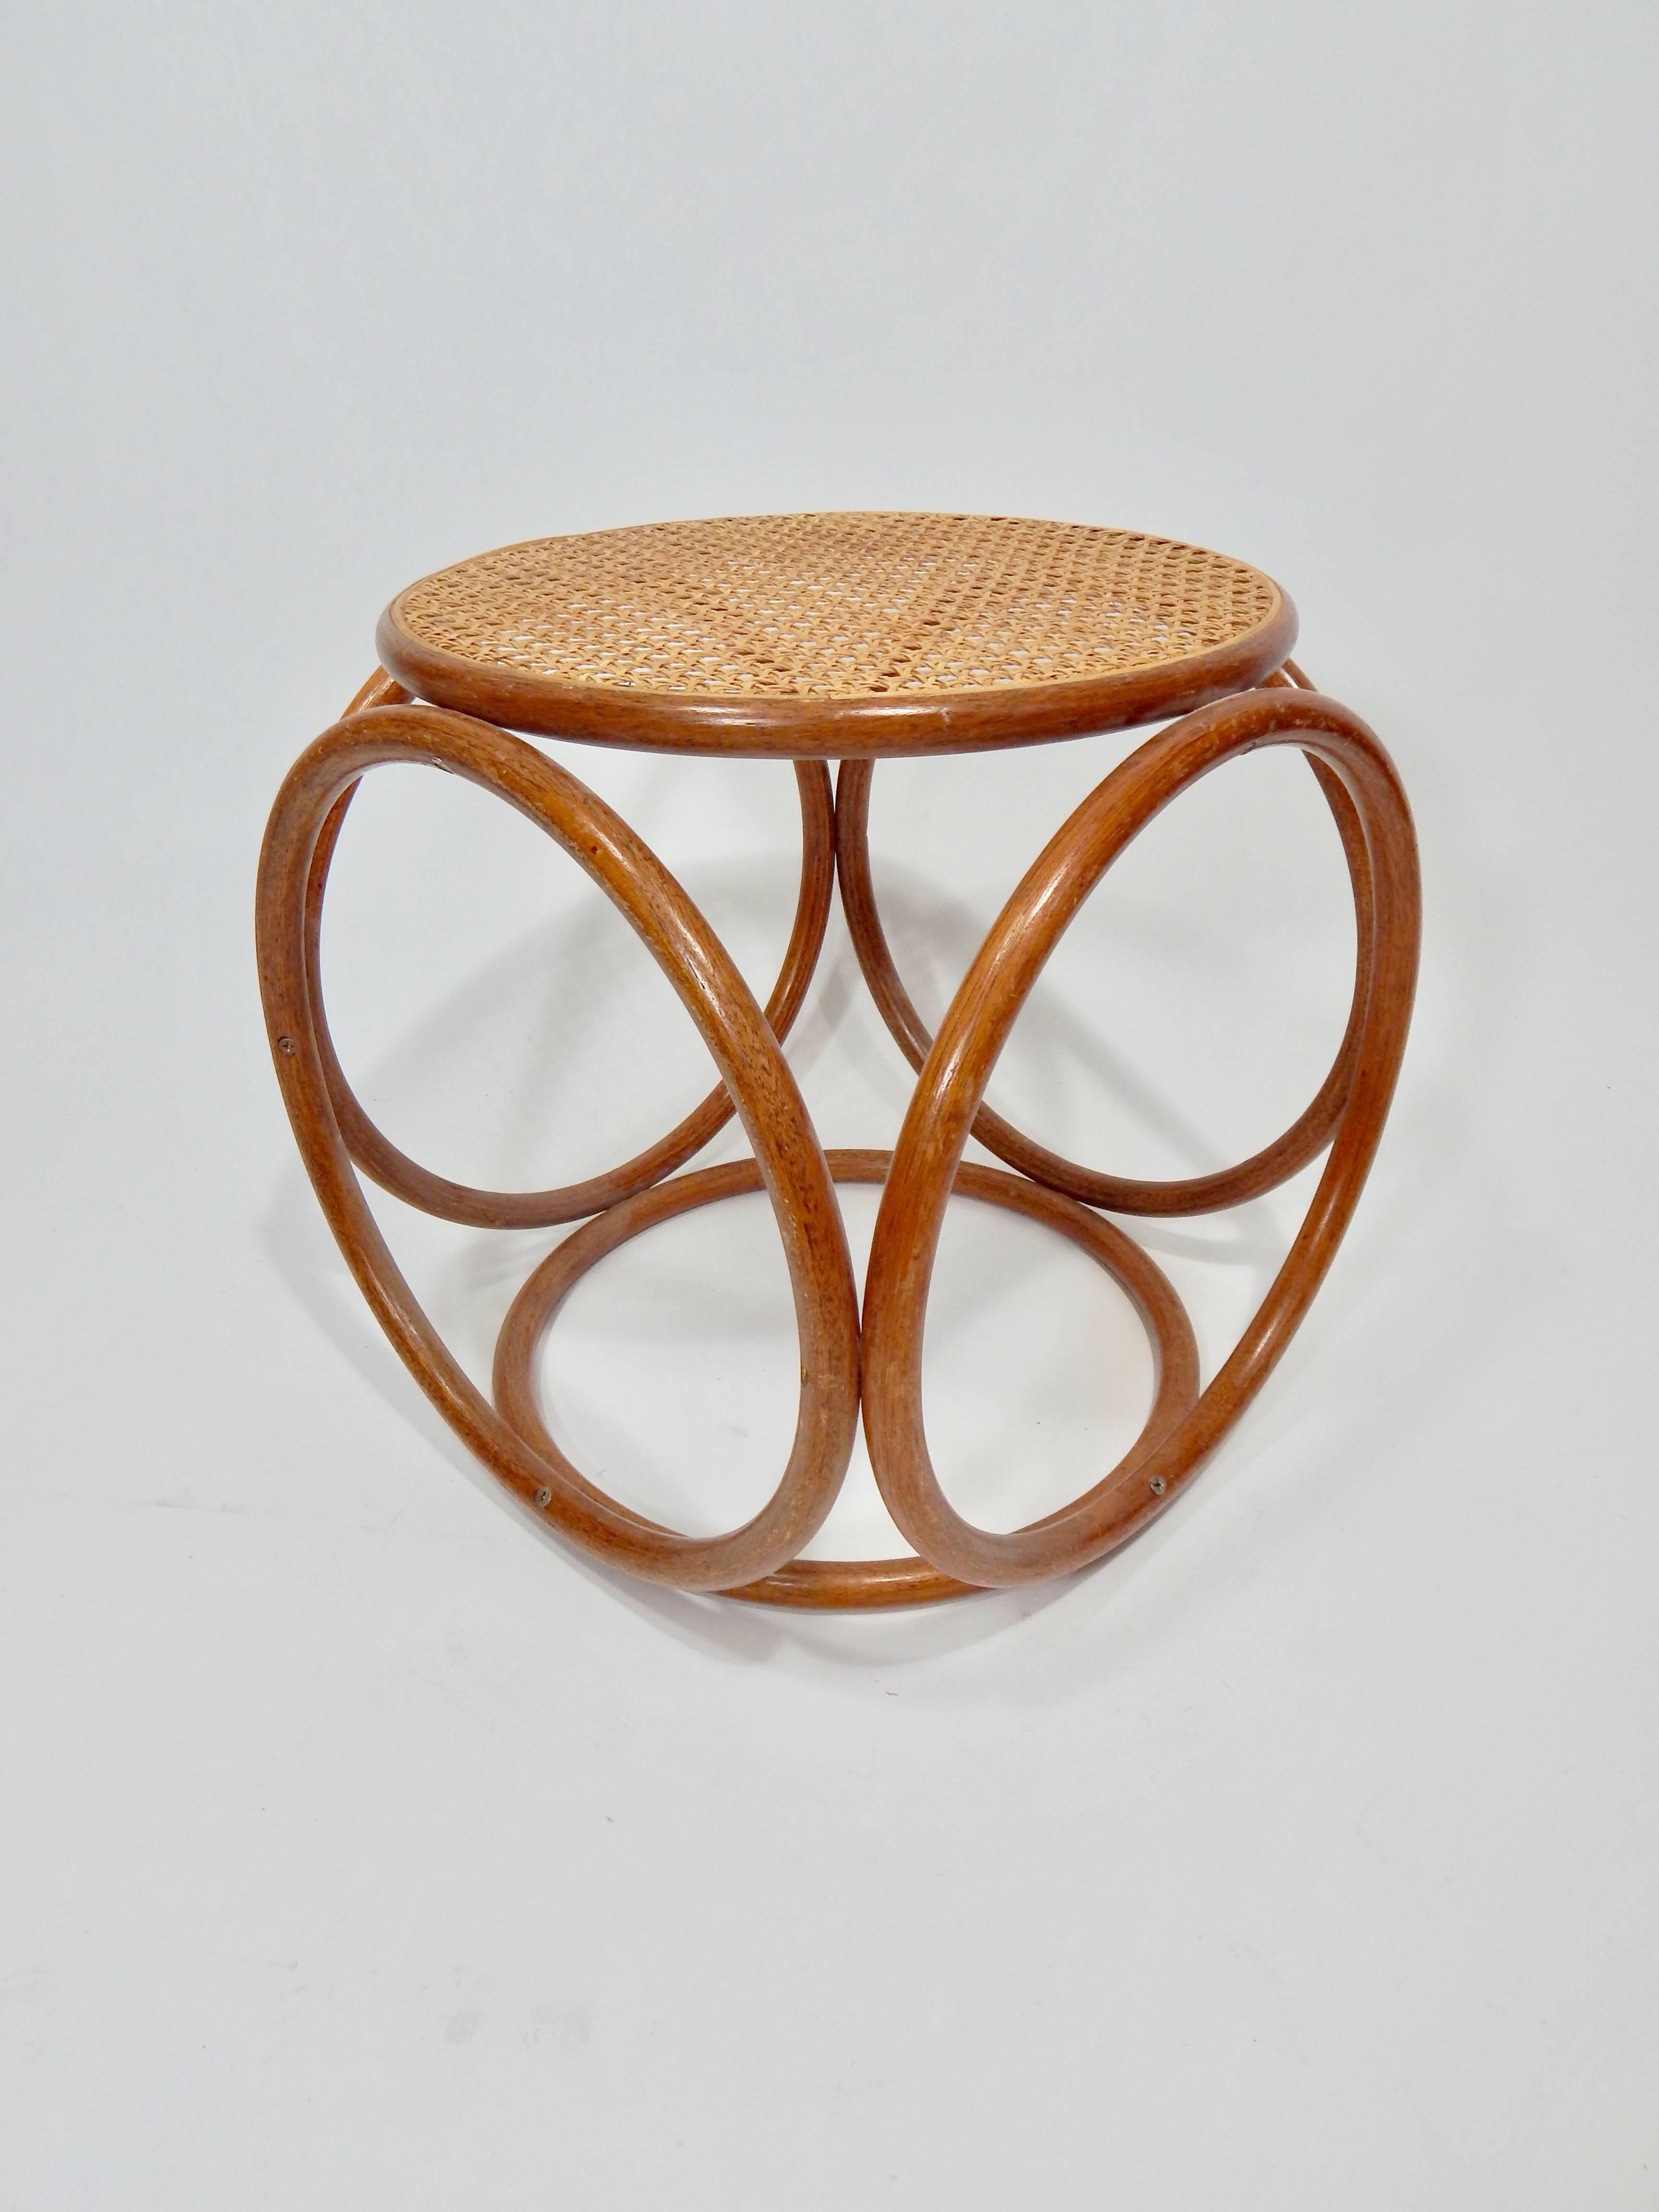 20th Century Thonet Bentwood and Cane Stool Ottoman Mid Century 